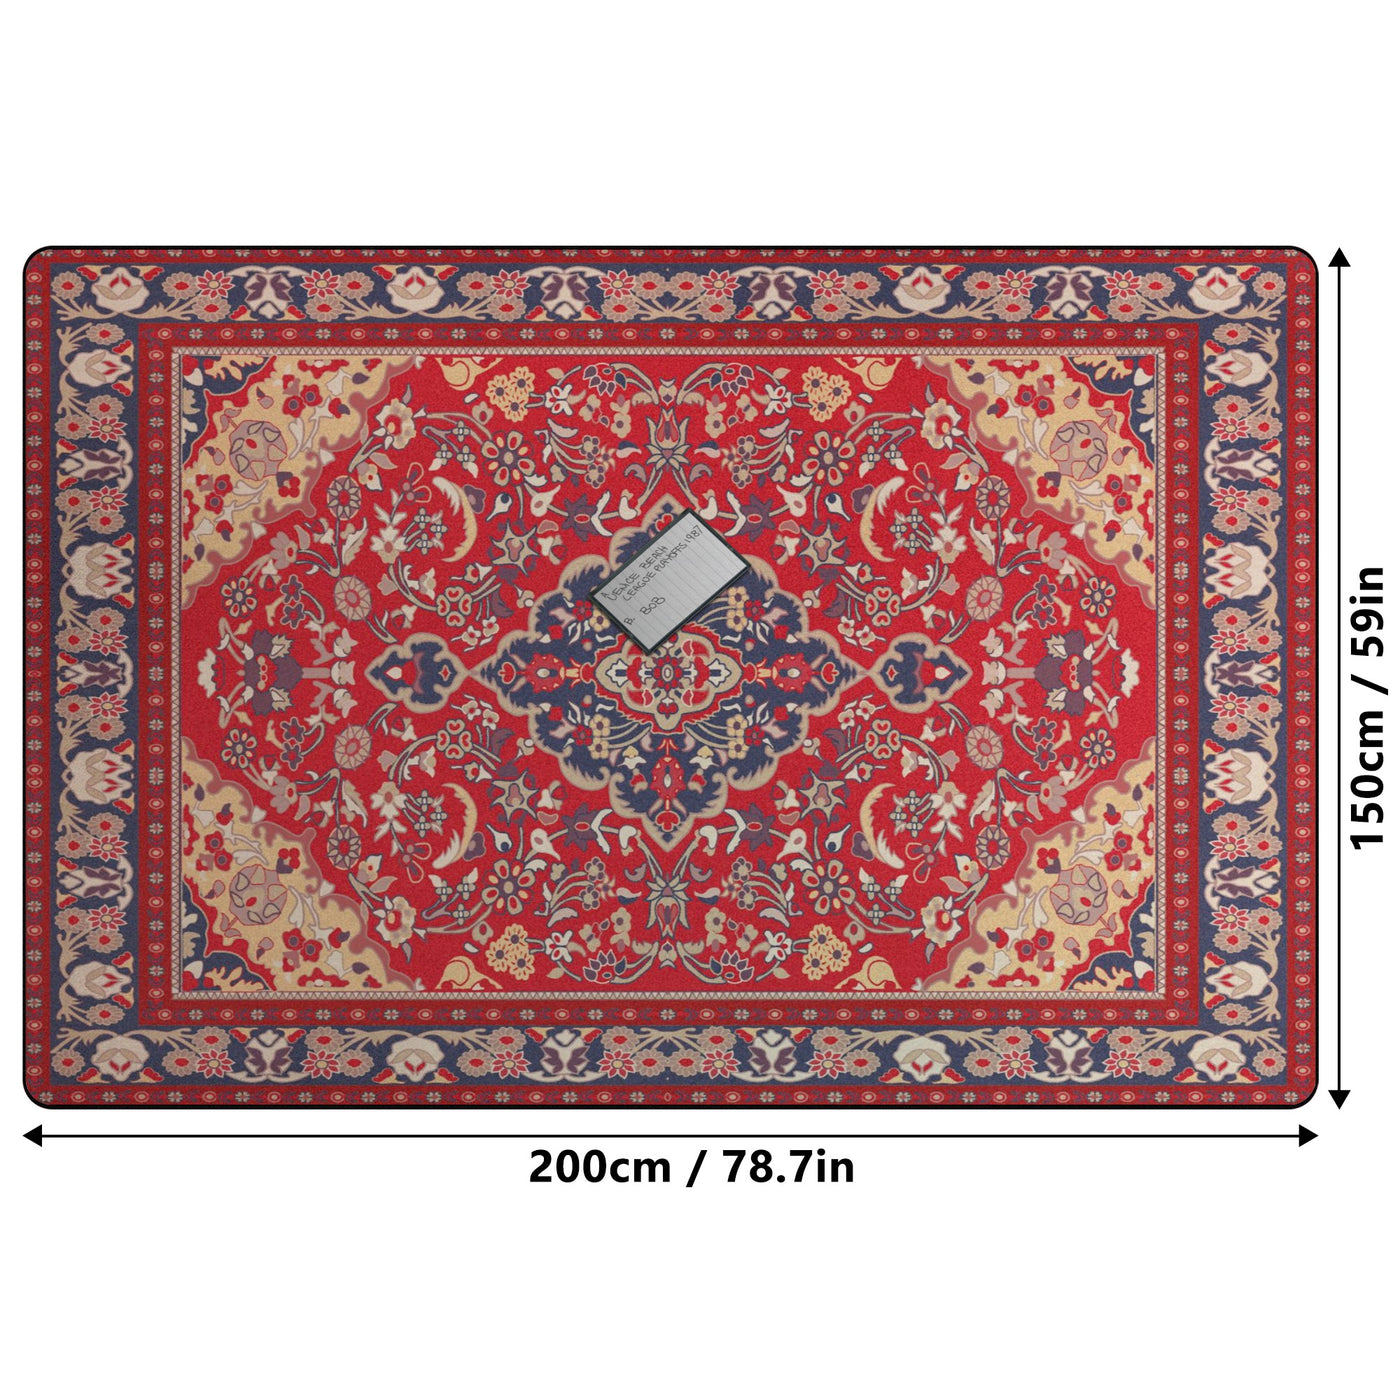 Lebowskis Rug with The Dudes Bowling Tape Living Room Carpet (200cm x 150cm)